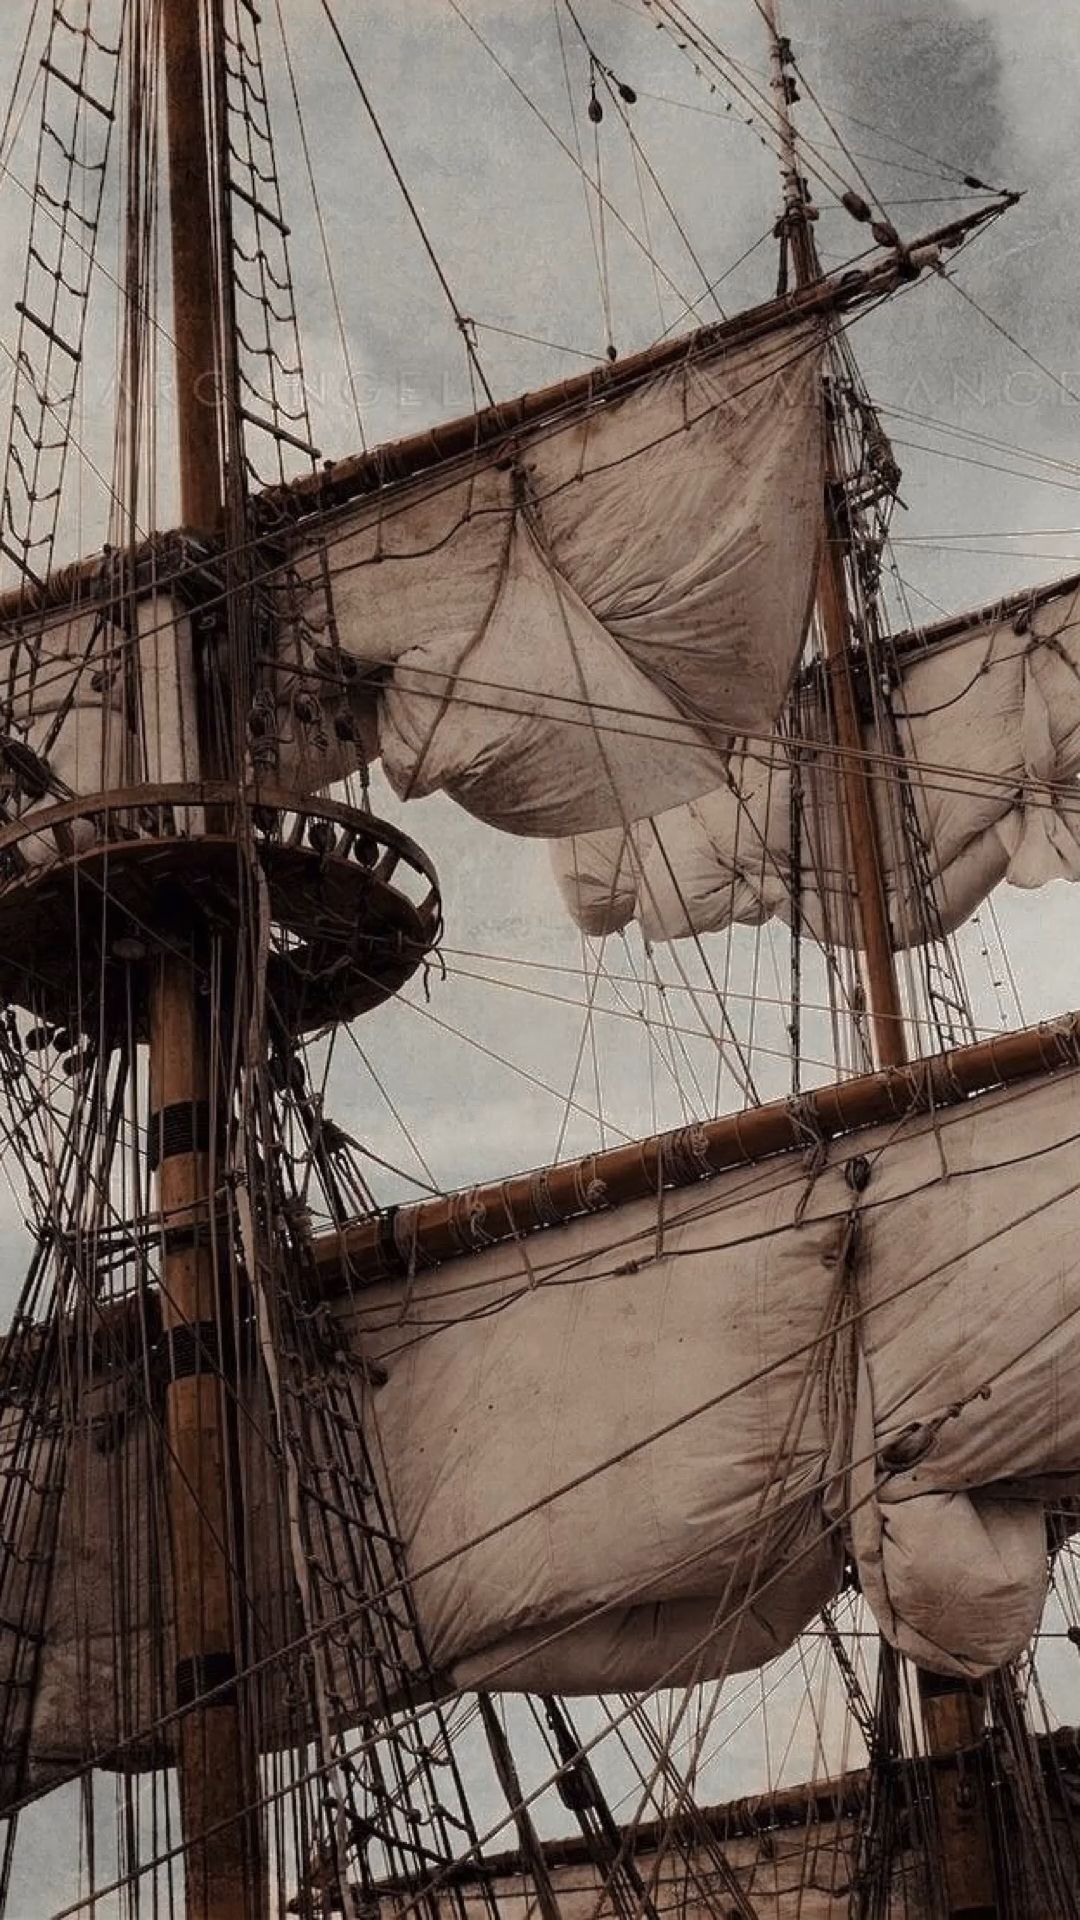 A photo of a ship's rigging and sails - Pirate